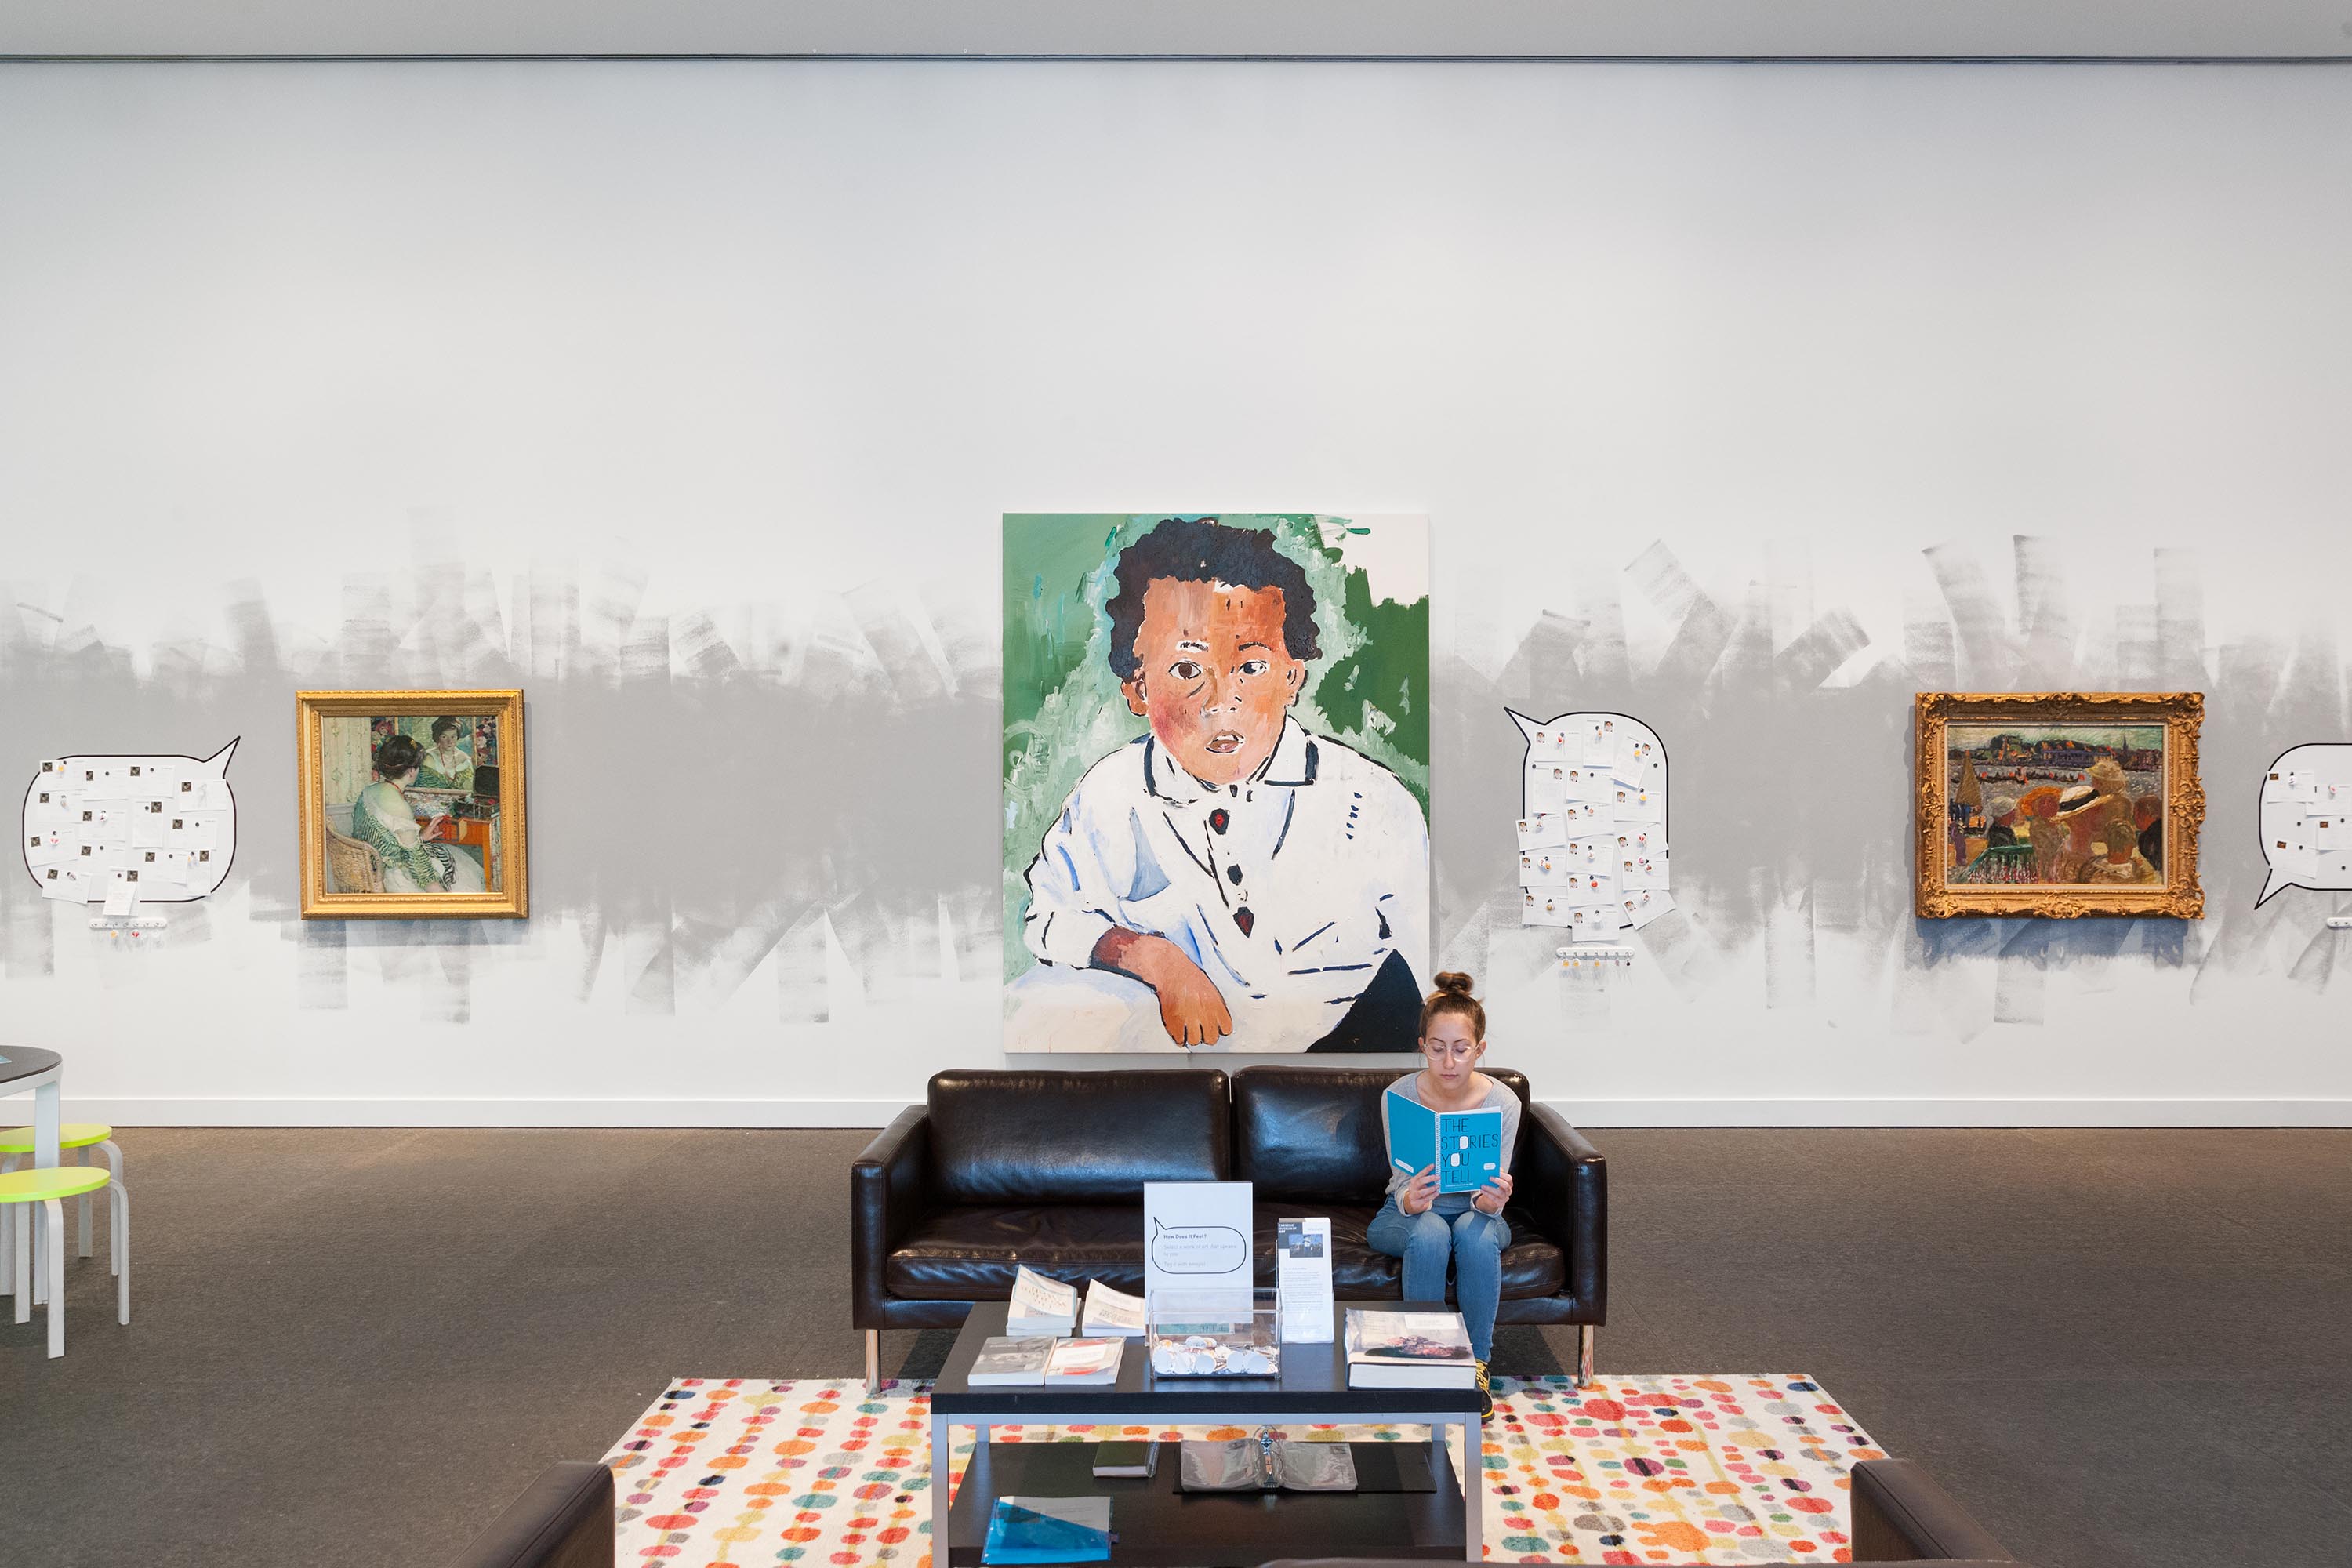 Installation view, “ The Stories You Tell” at Carnegie Museum of Art, photo: Bryan Conley